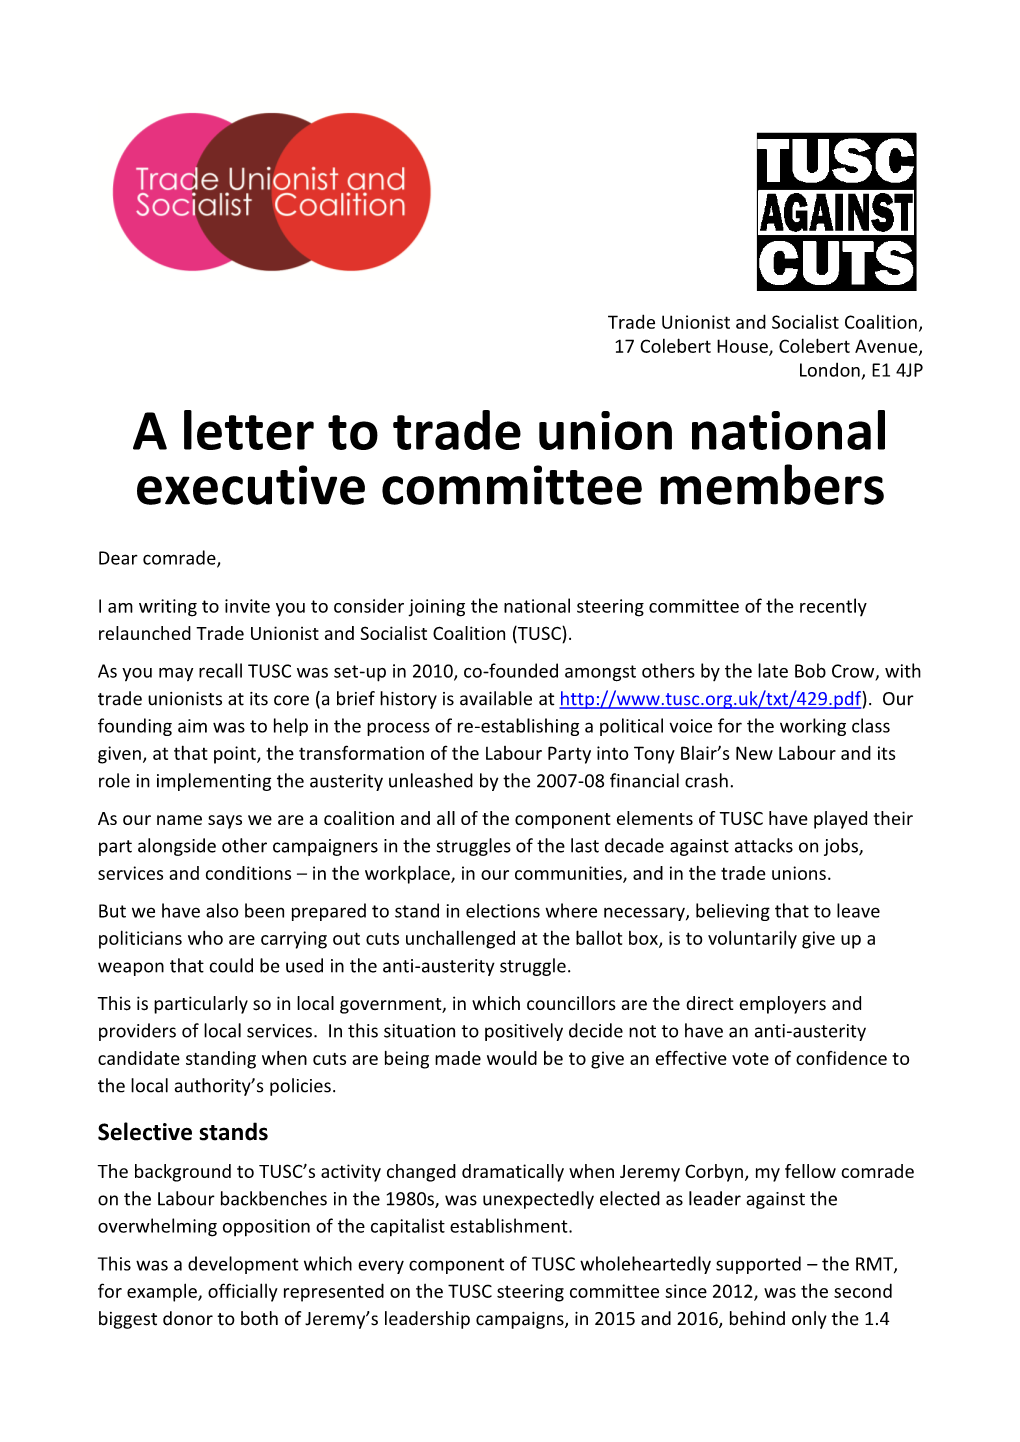 A Letter to Trade Union National Executive Committee Members